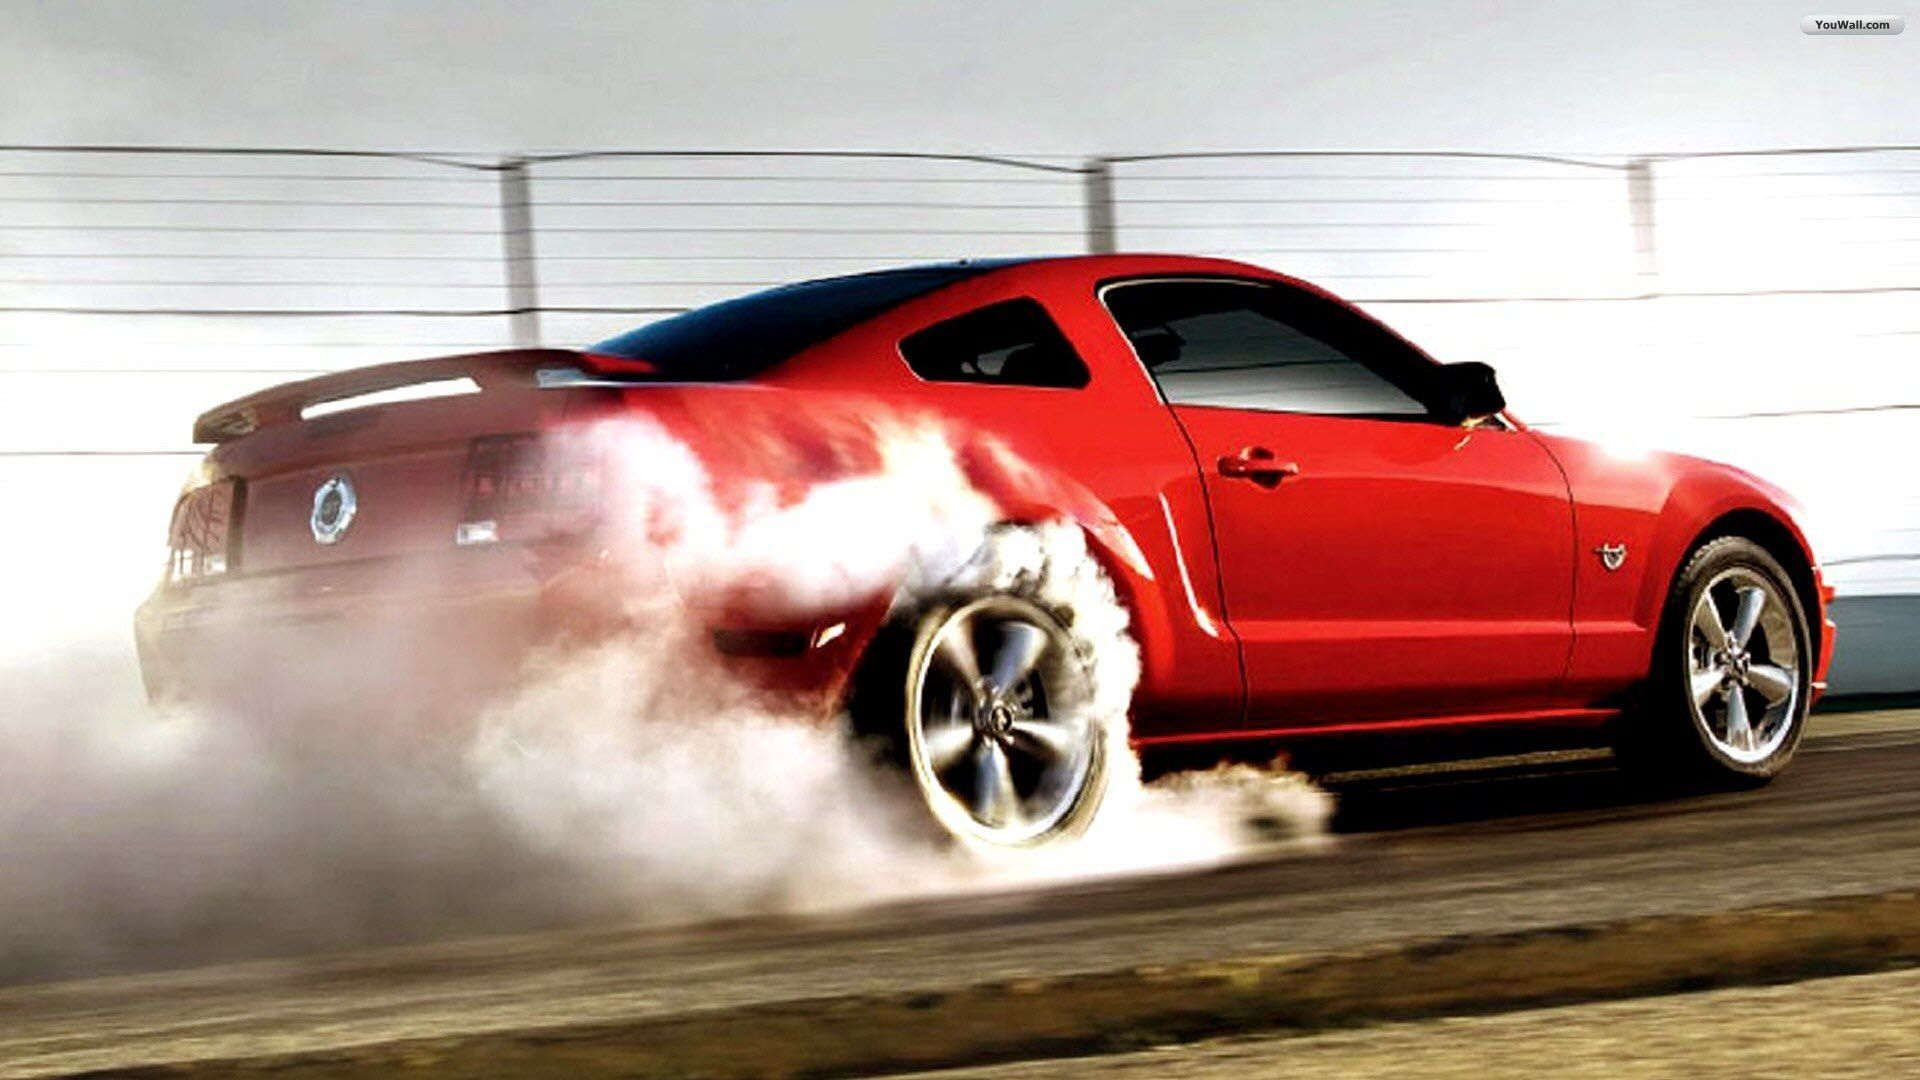 YouWall - Red Ford Mustang Wallpaper - wallpaper,wallpapers,free ...